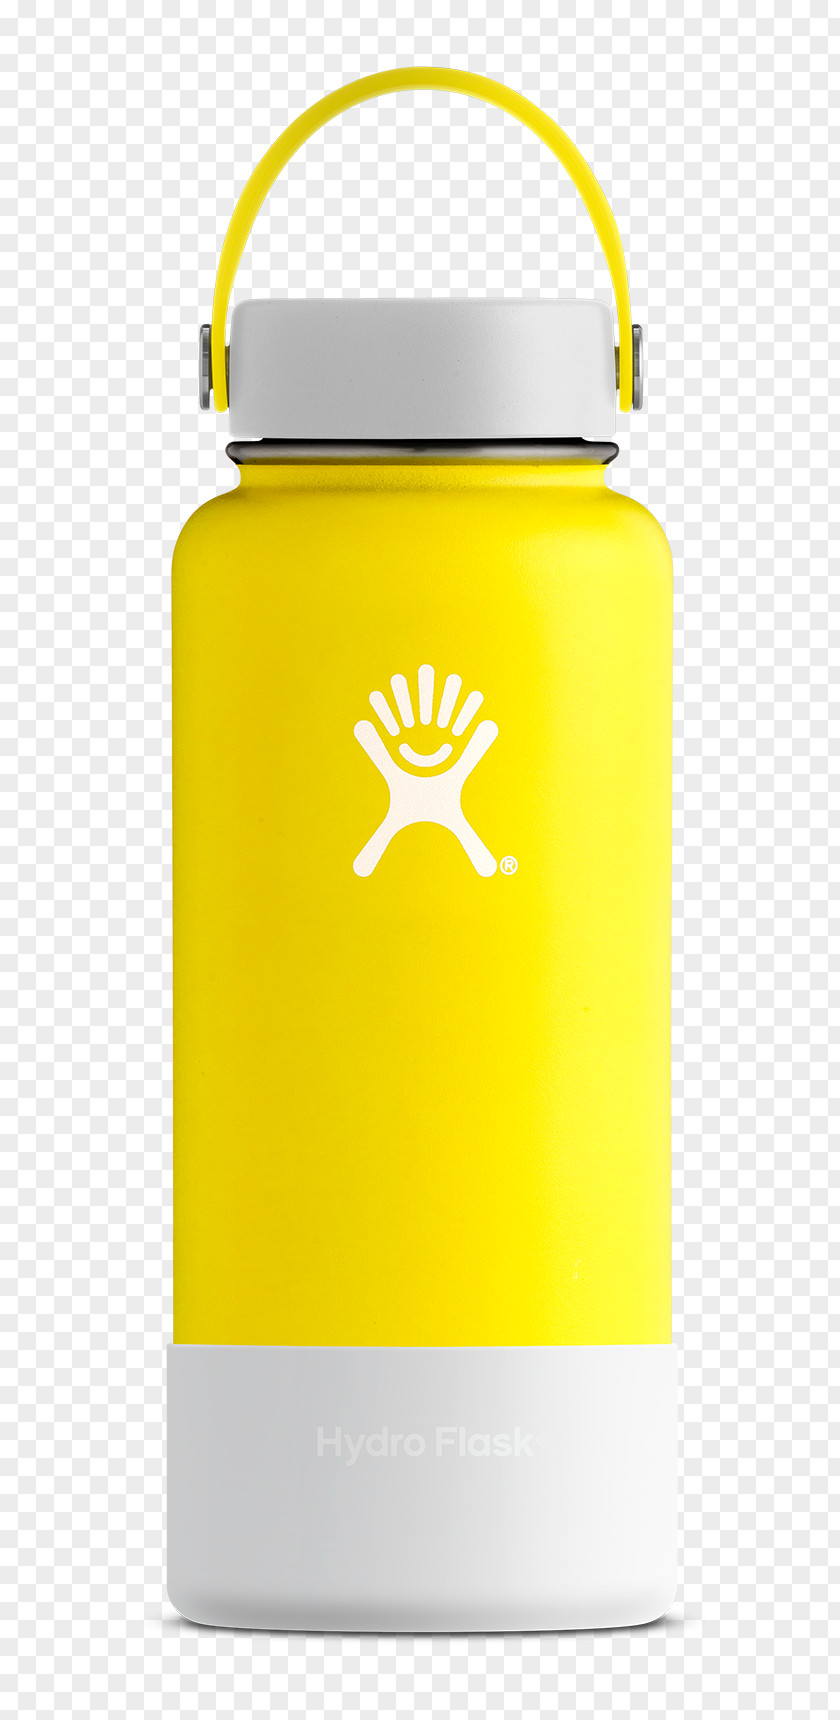 All Hydro Flask Colors Water Bottles Imperial Pint Ounce Milliliter Kiwifruit PNG